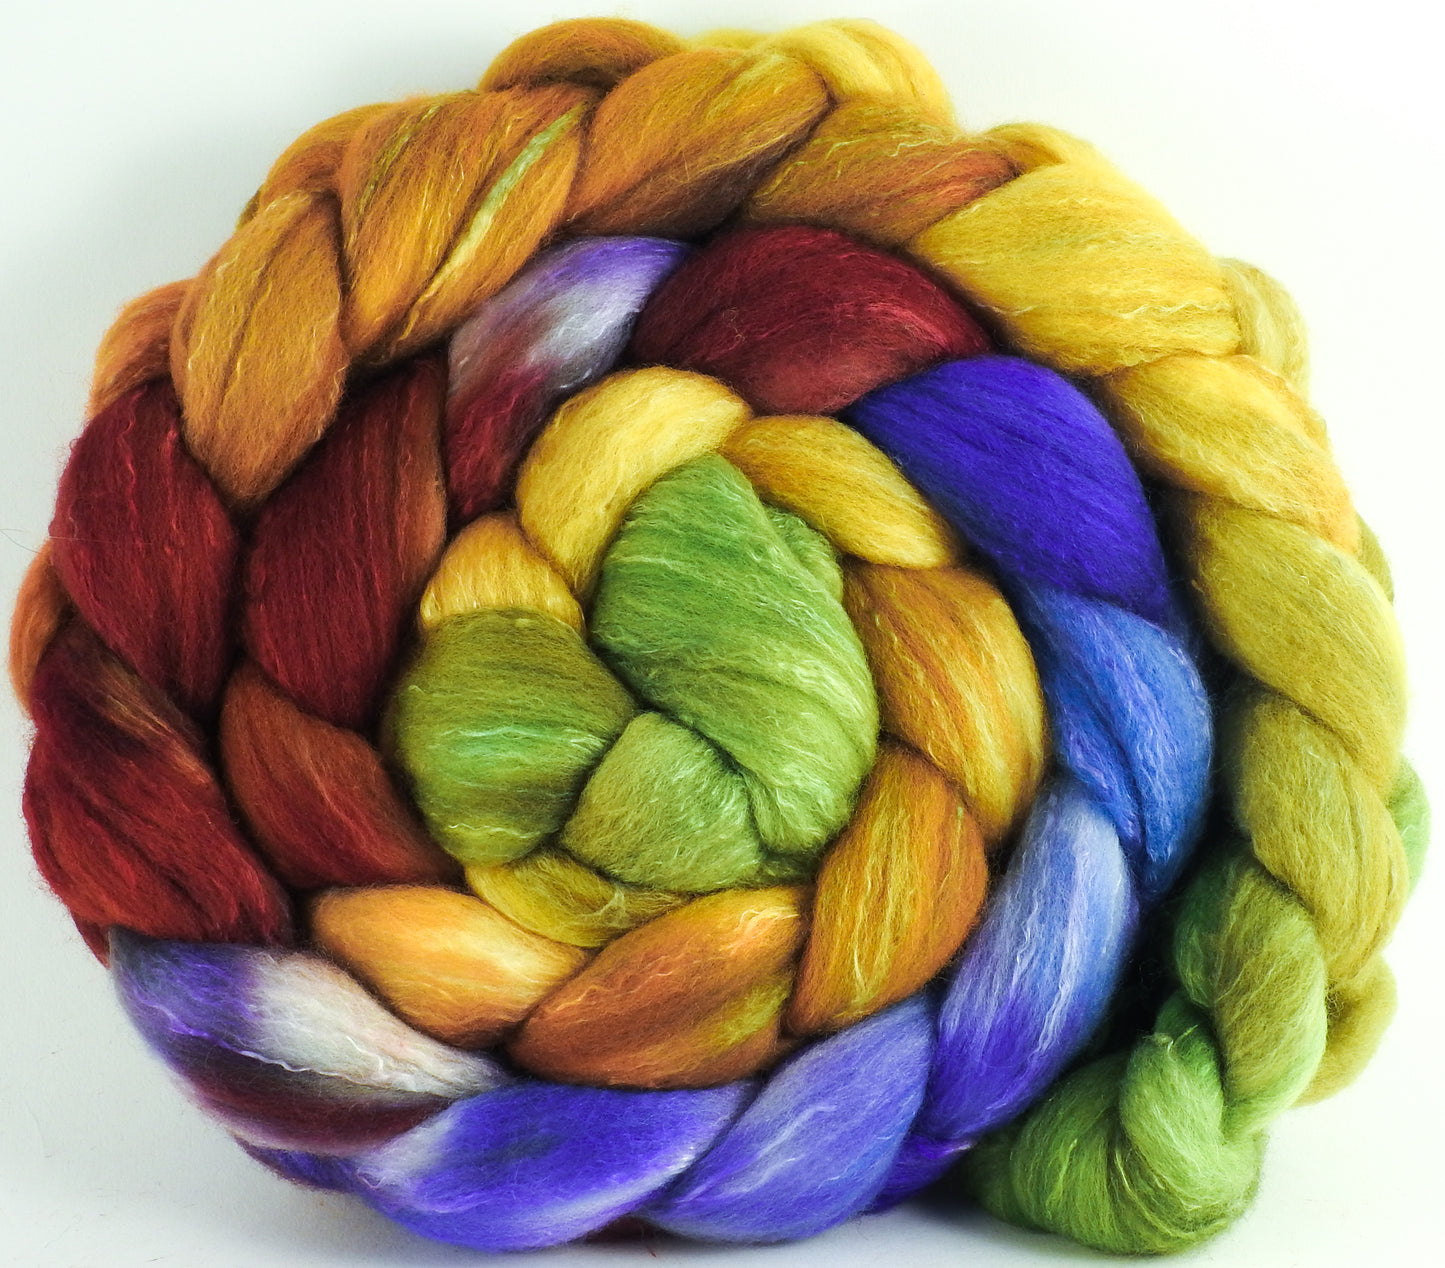 Hand dyed top for spinning - Toulouse - Organic Polwarth / Tussah silk (80/20) - Inglenook Fibers